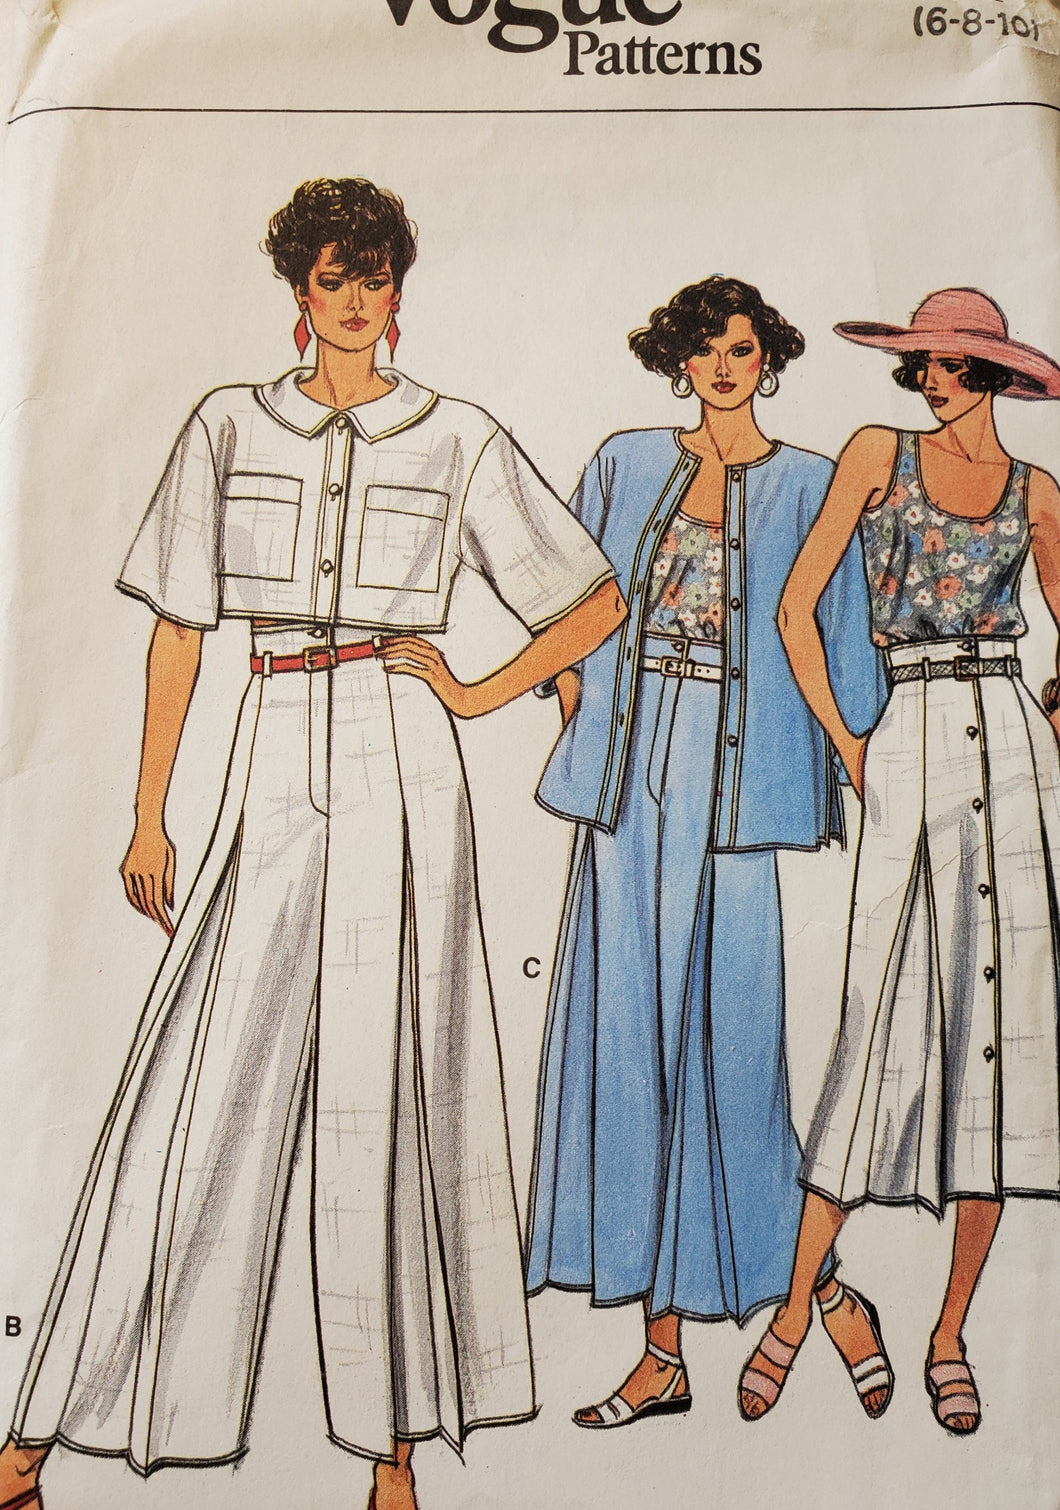 Vogue Pattern 9301, UNCUT, Skirt and Top Size 6-8-10, Vintage & Rare